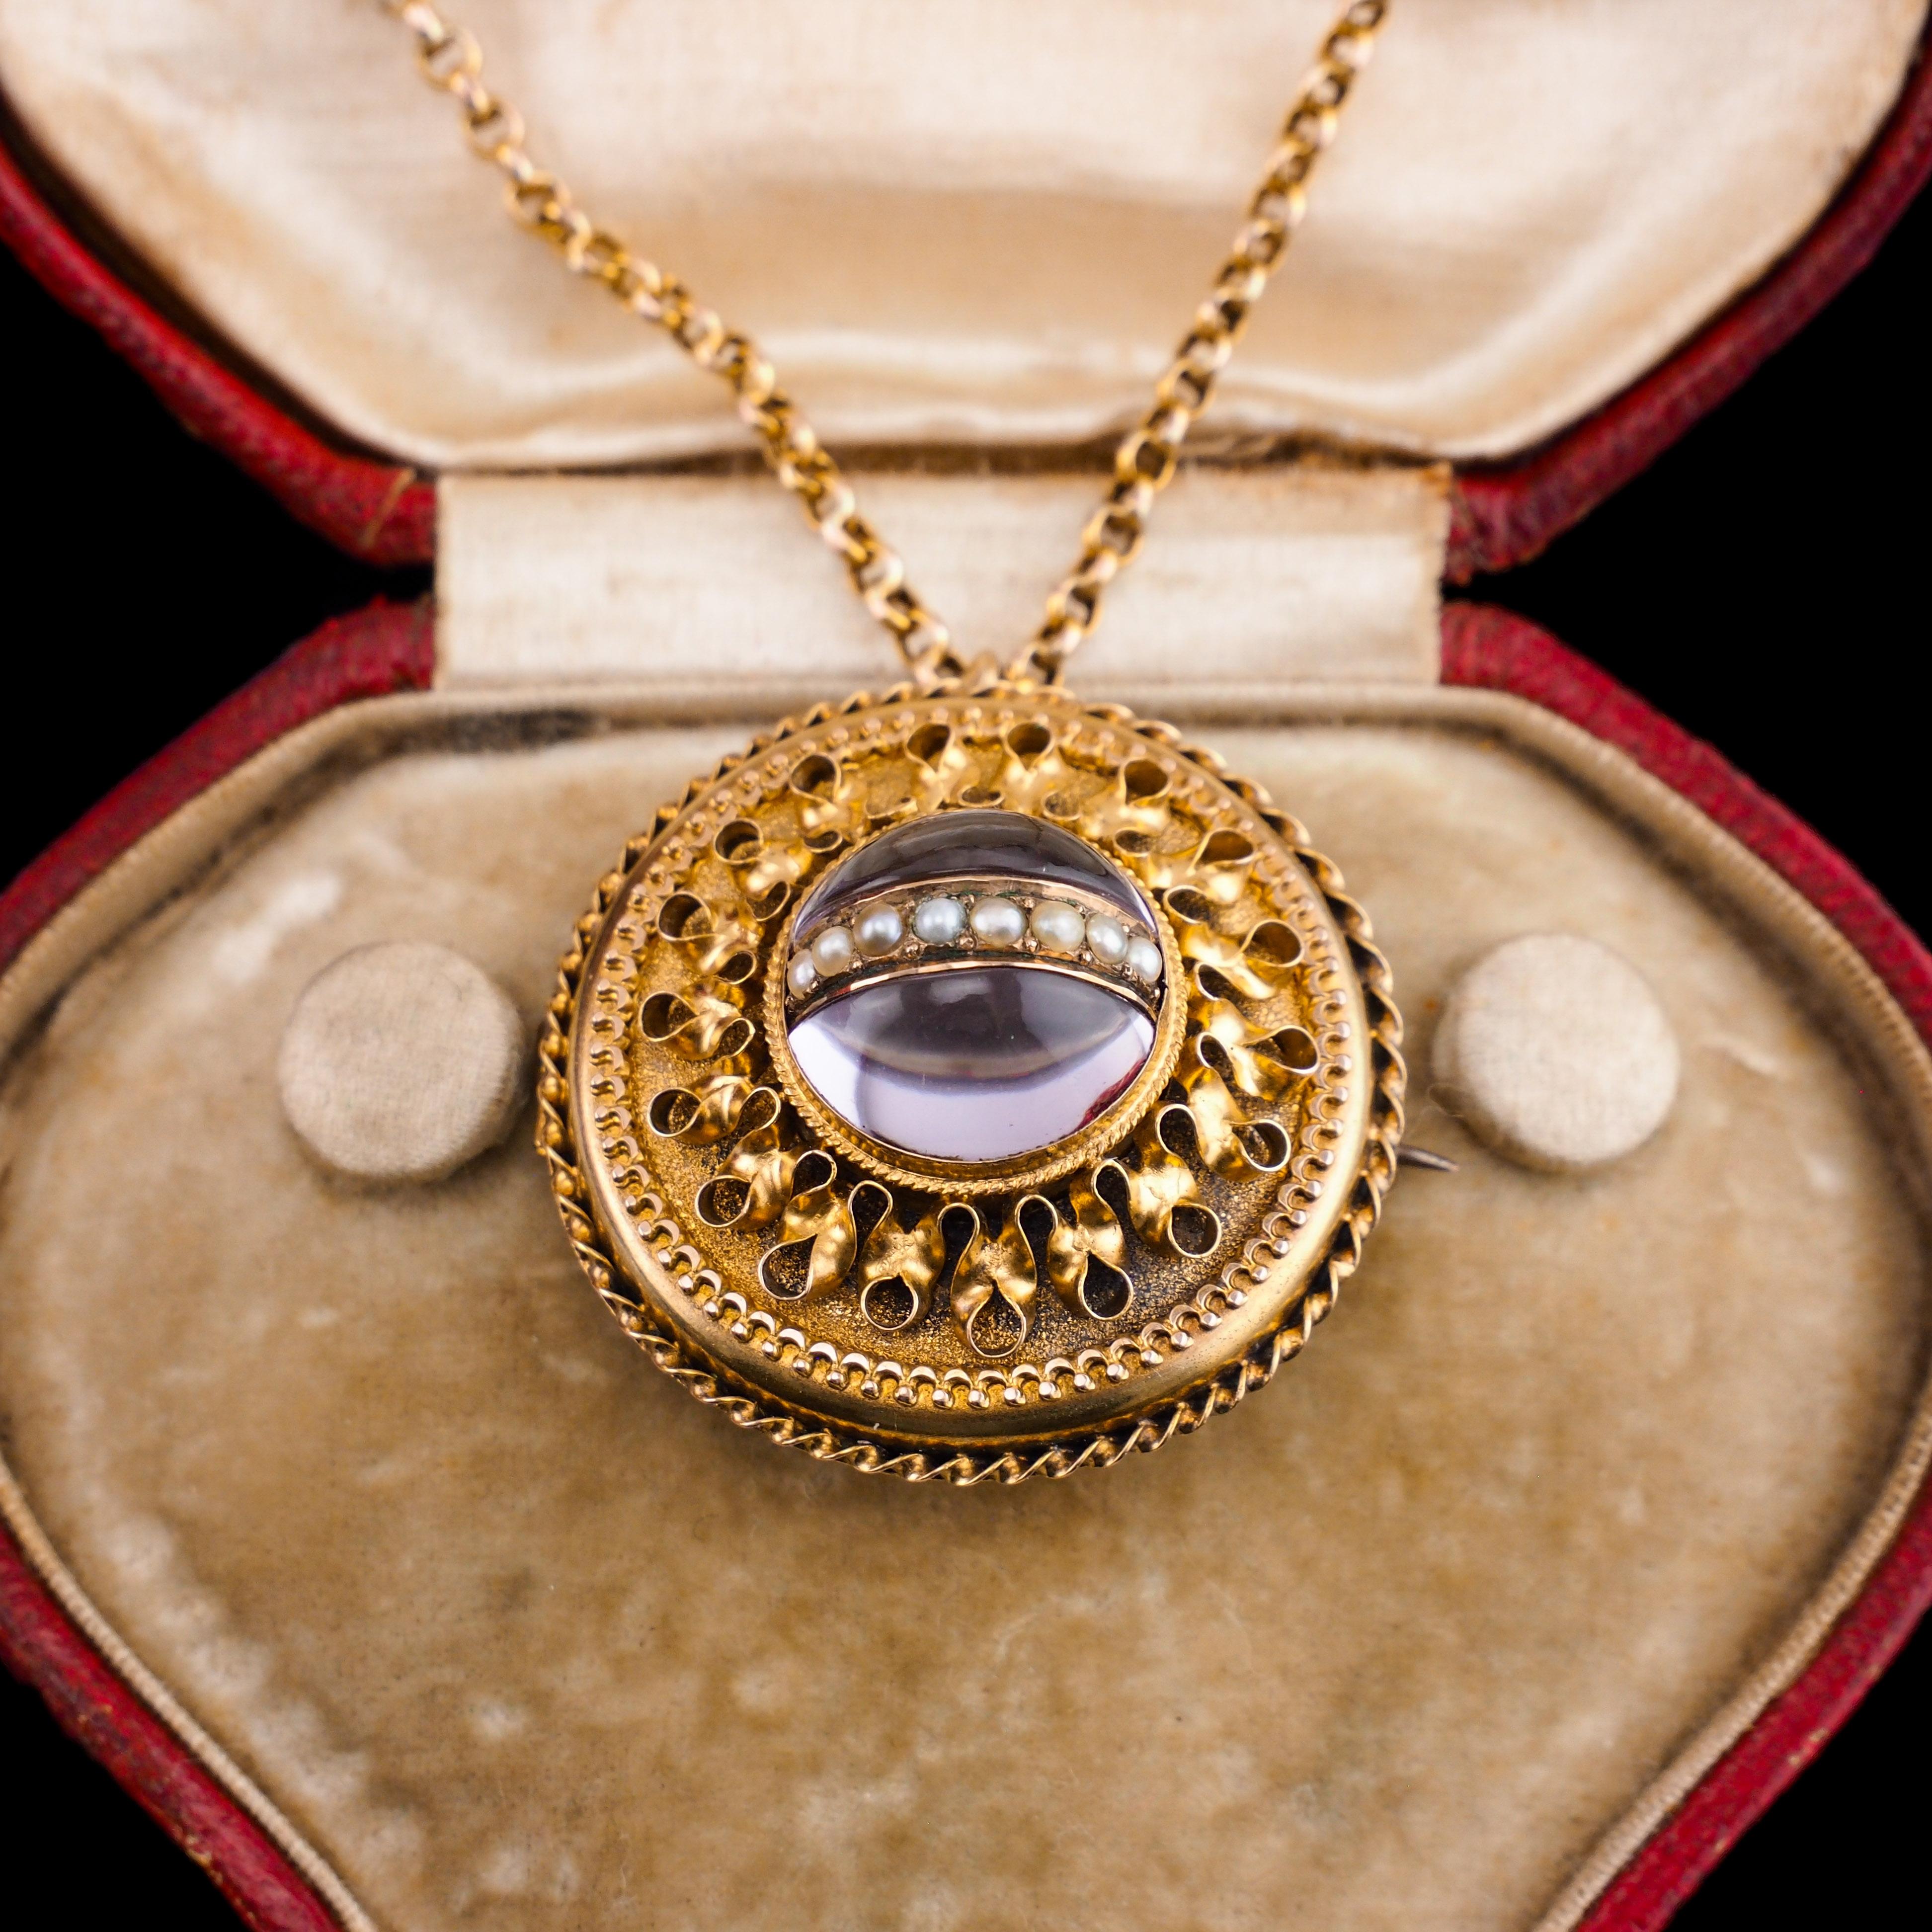 Antique Victorian Etruscan Style Necklace 15K Gold Rock Crystal Pendant c.1870 For Sale 2